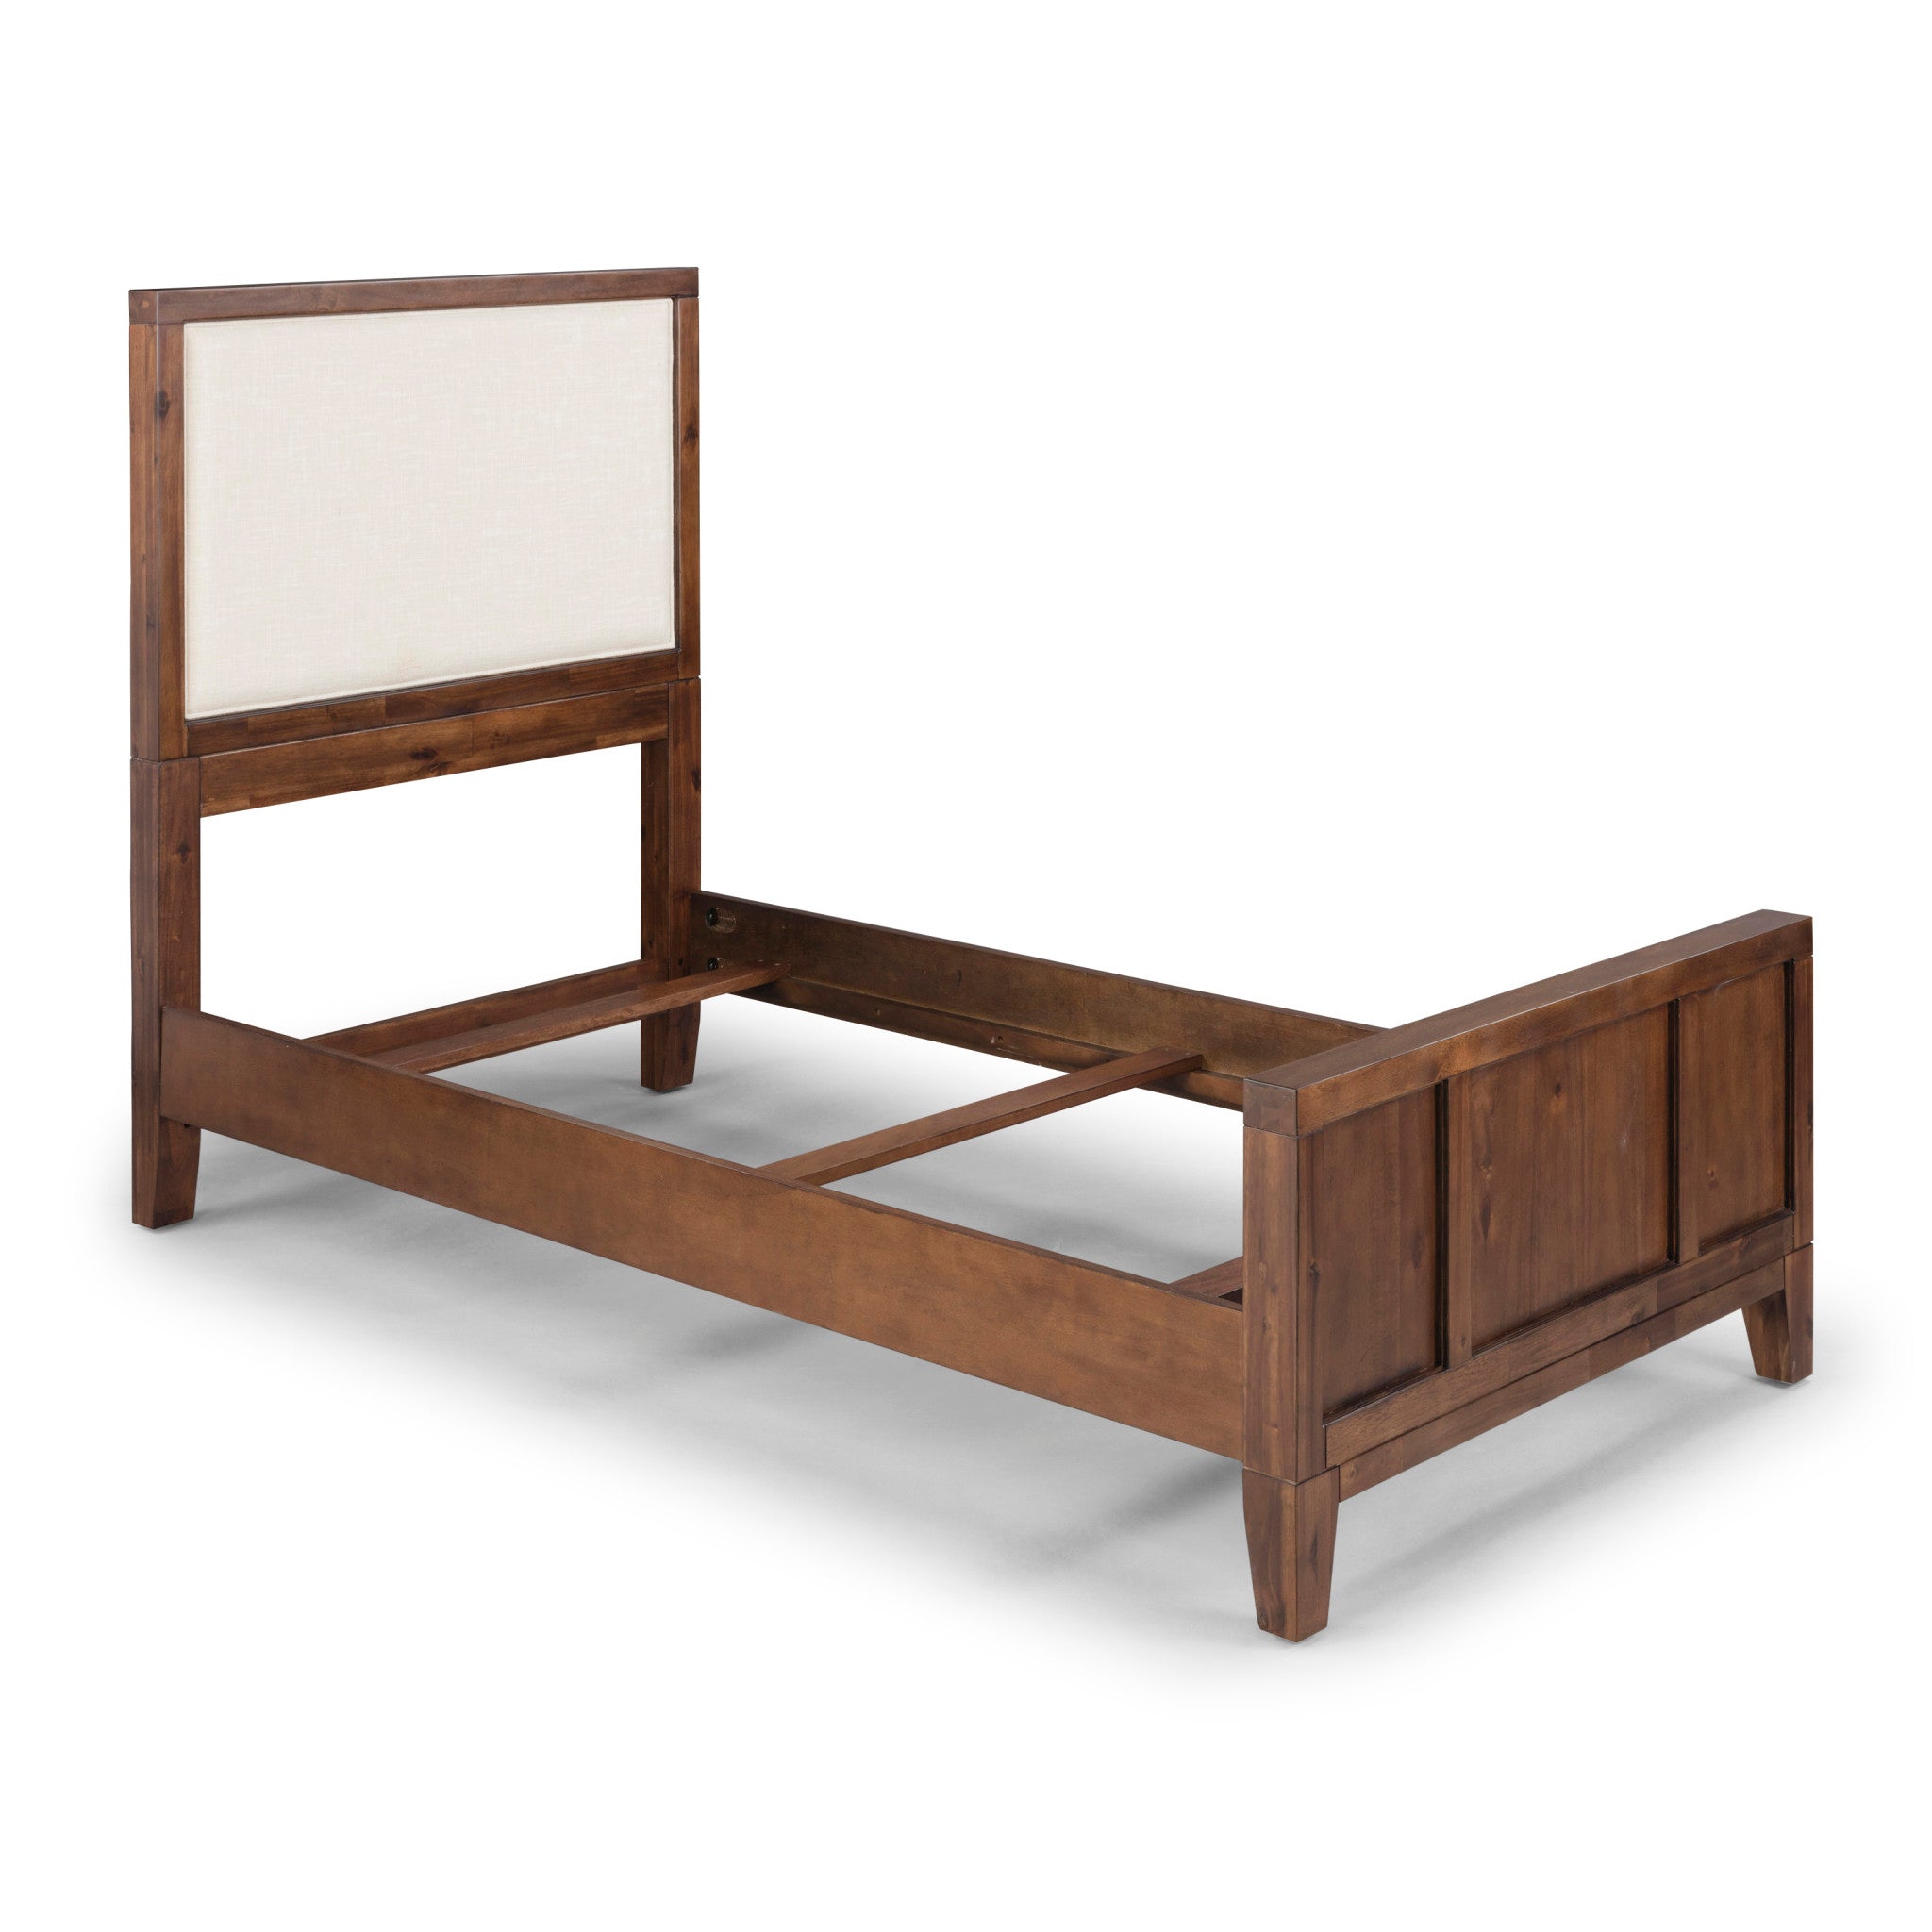 Bungalow Brown Twin Bed - image 3 of 9